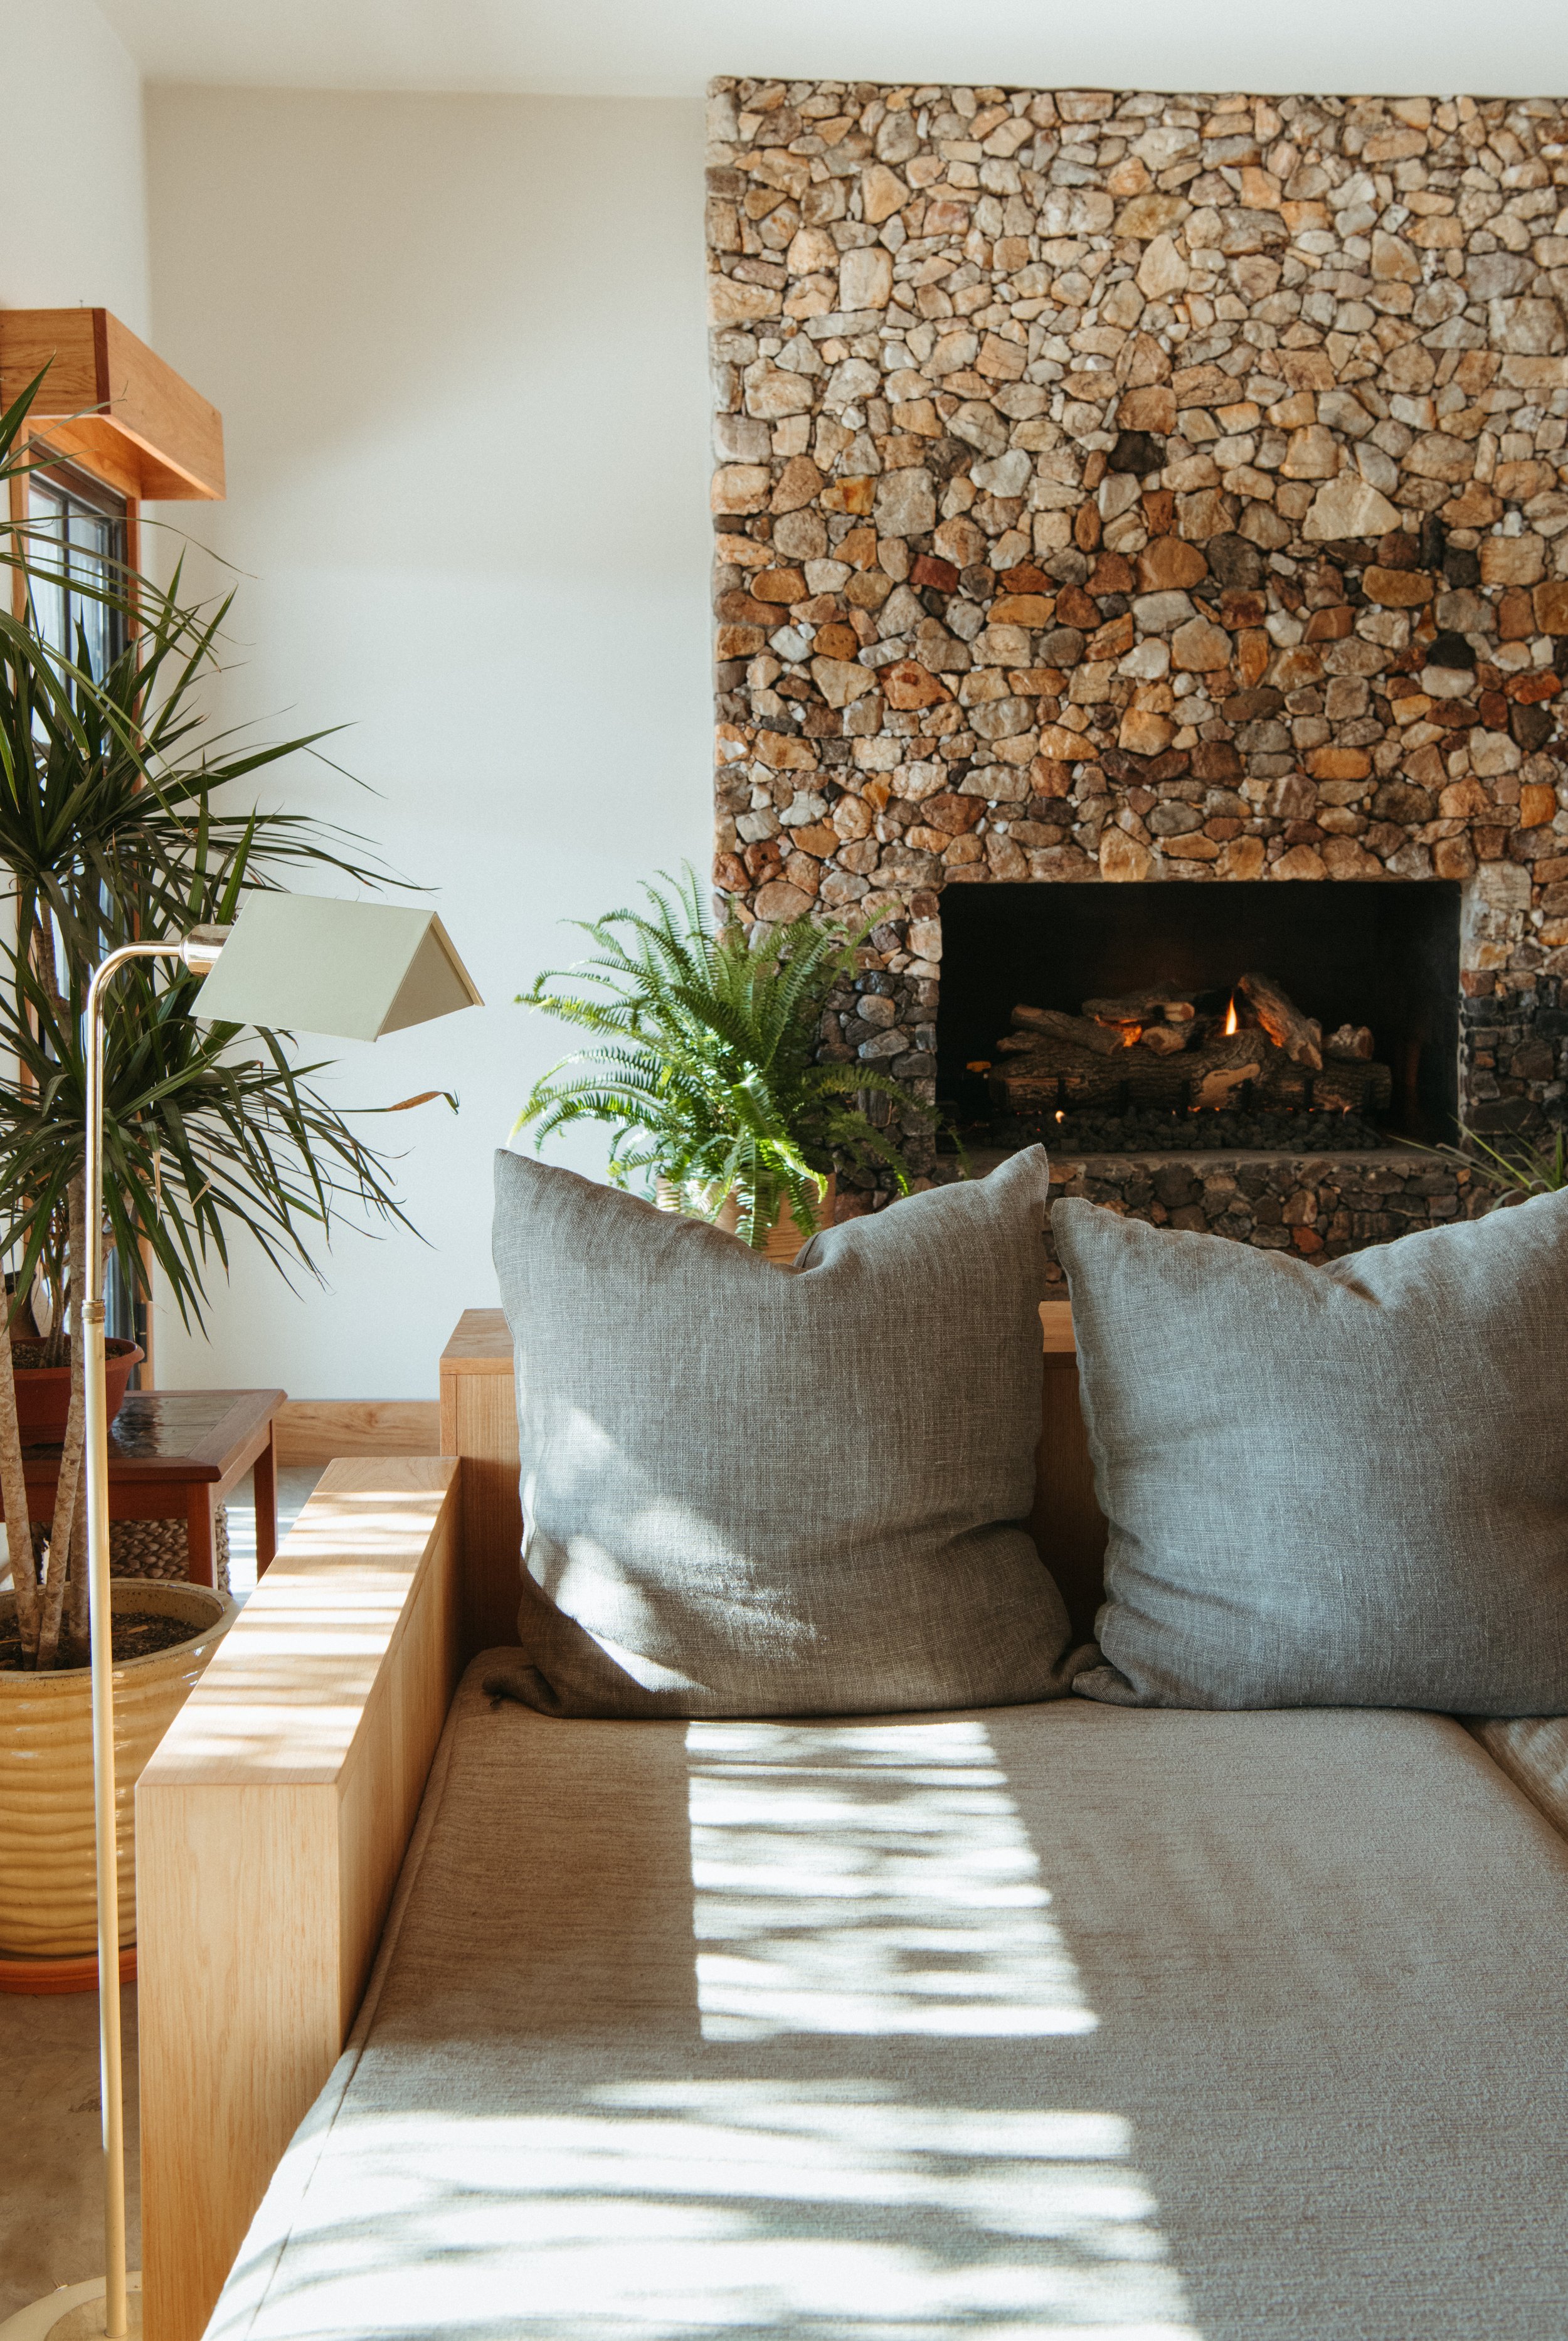 living room fireplace built from hand-selected rocks from the property